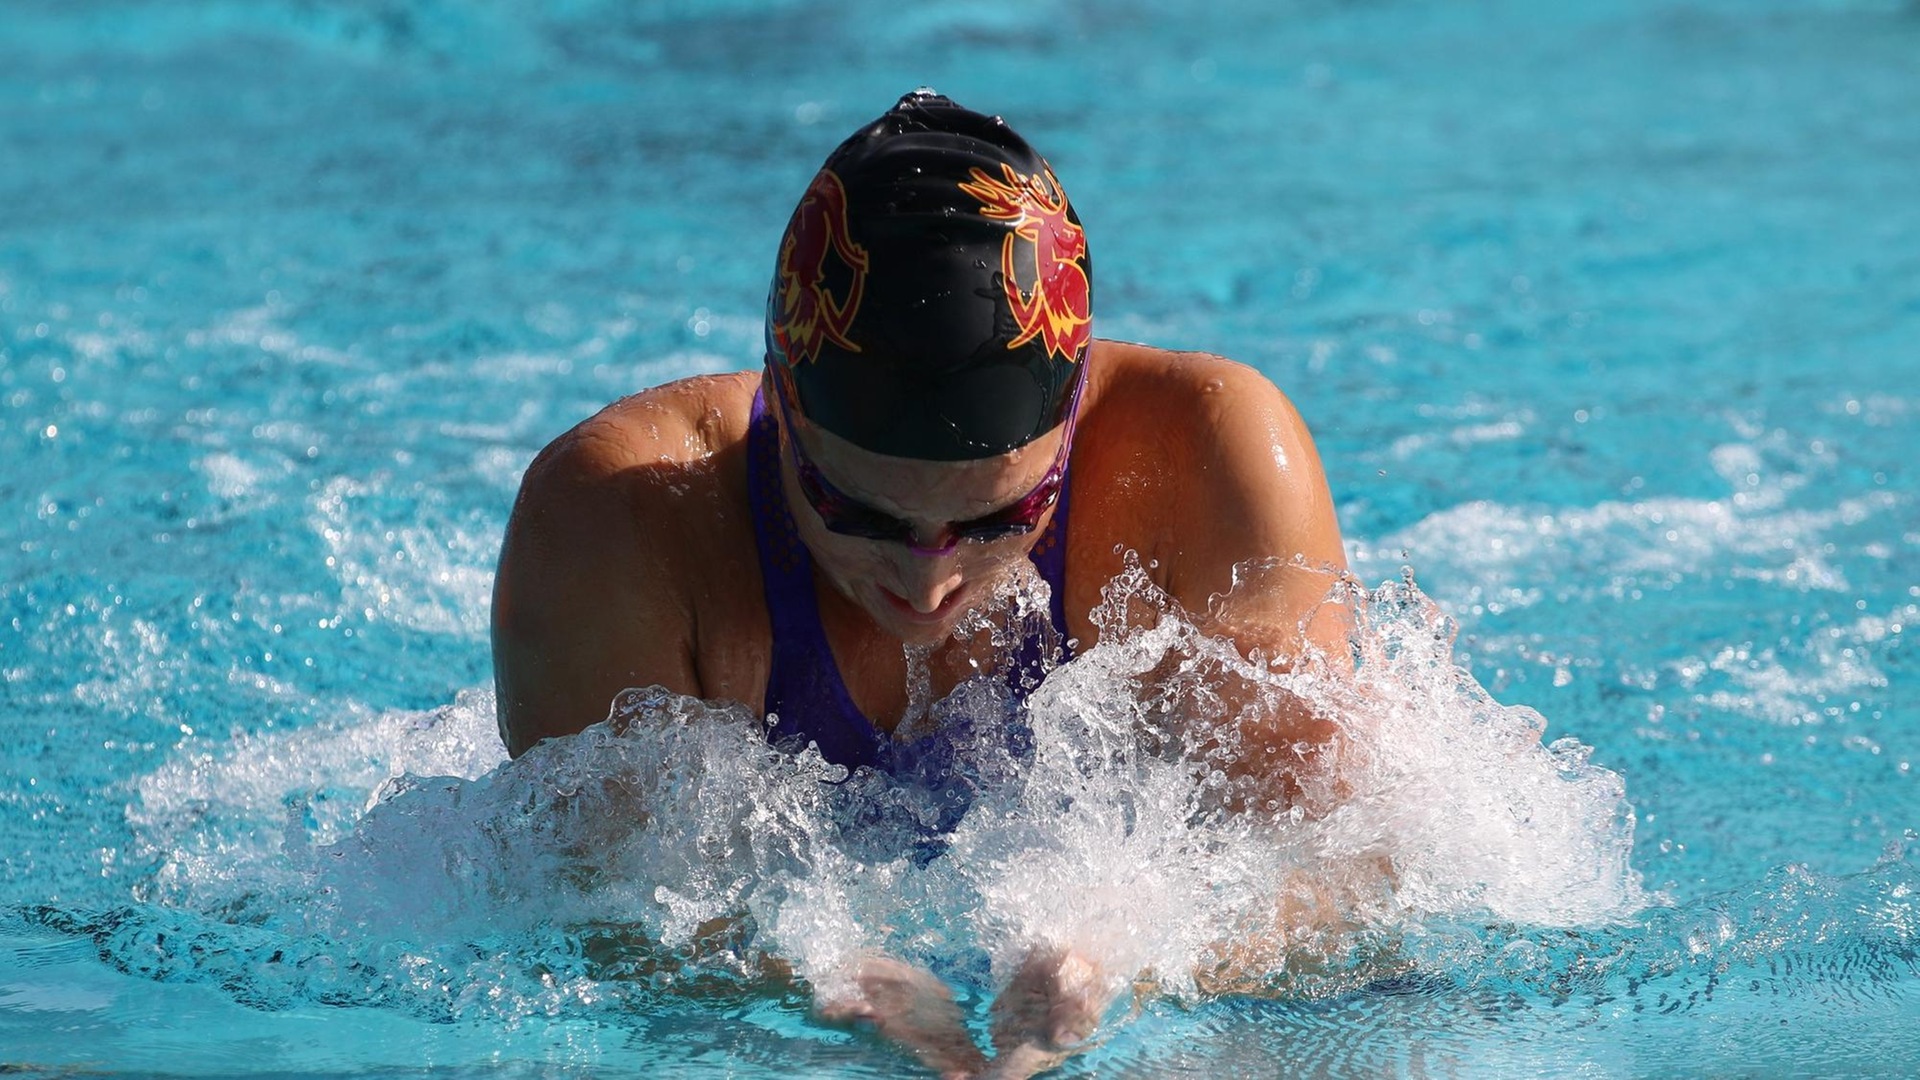 Mackeznie Mayfield won the 100 breast and contributed to two relay wins.